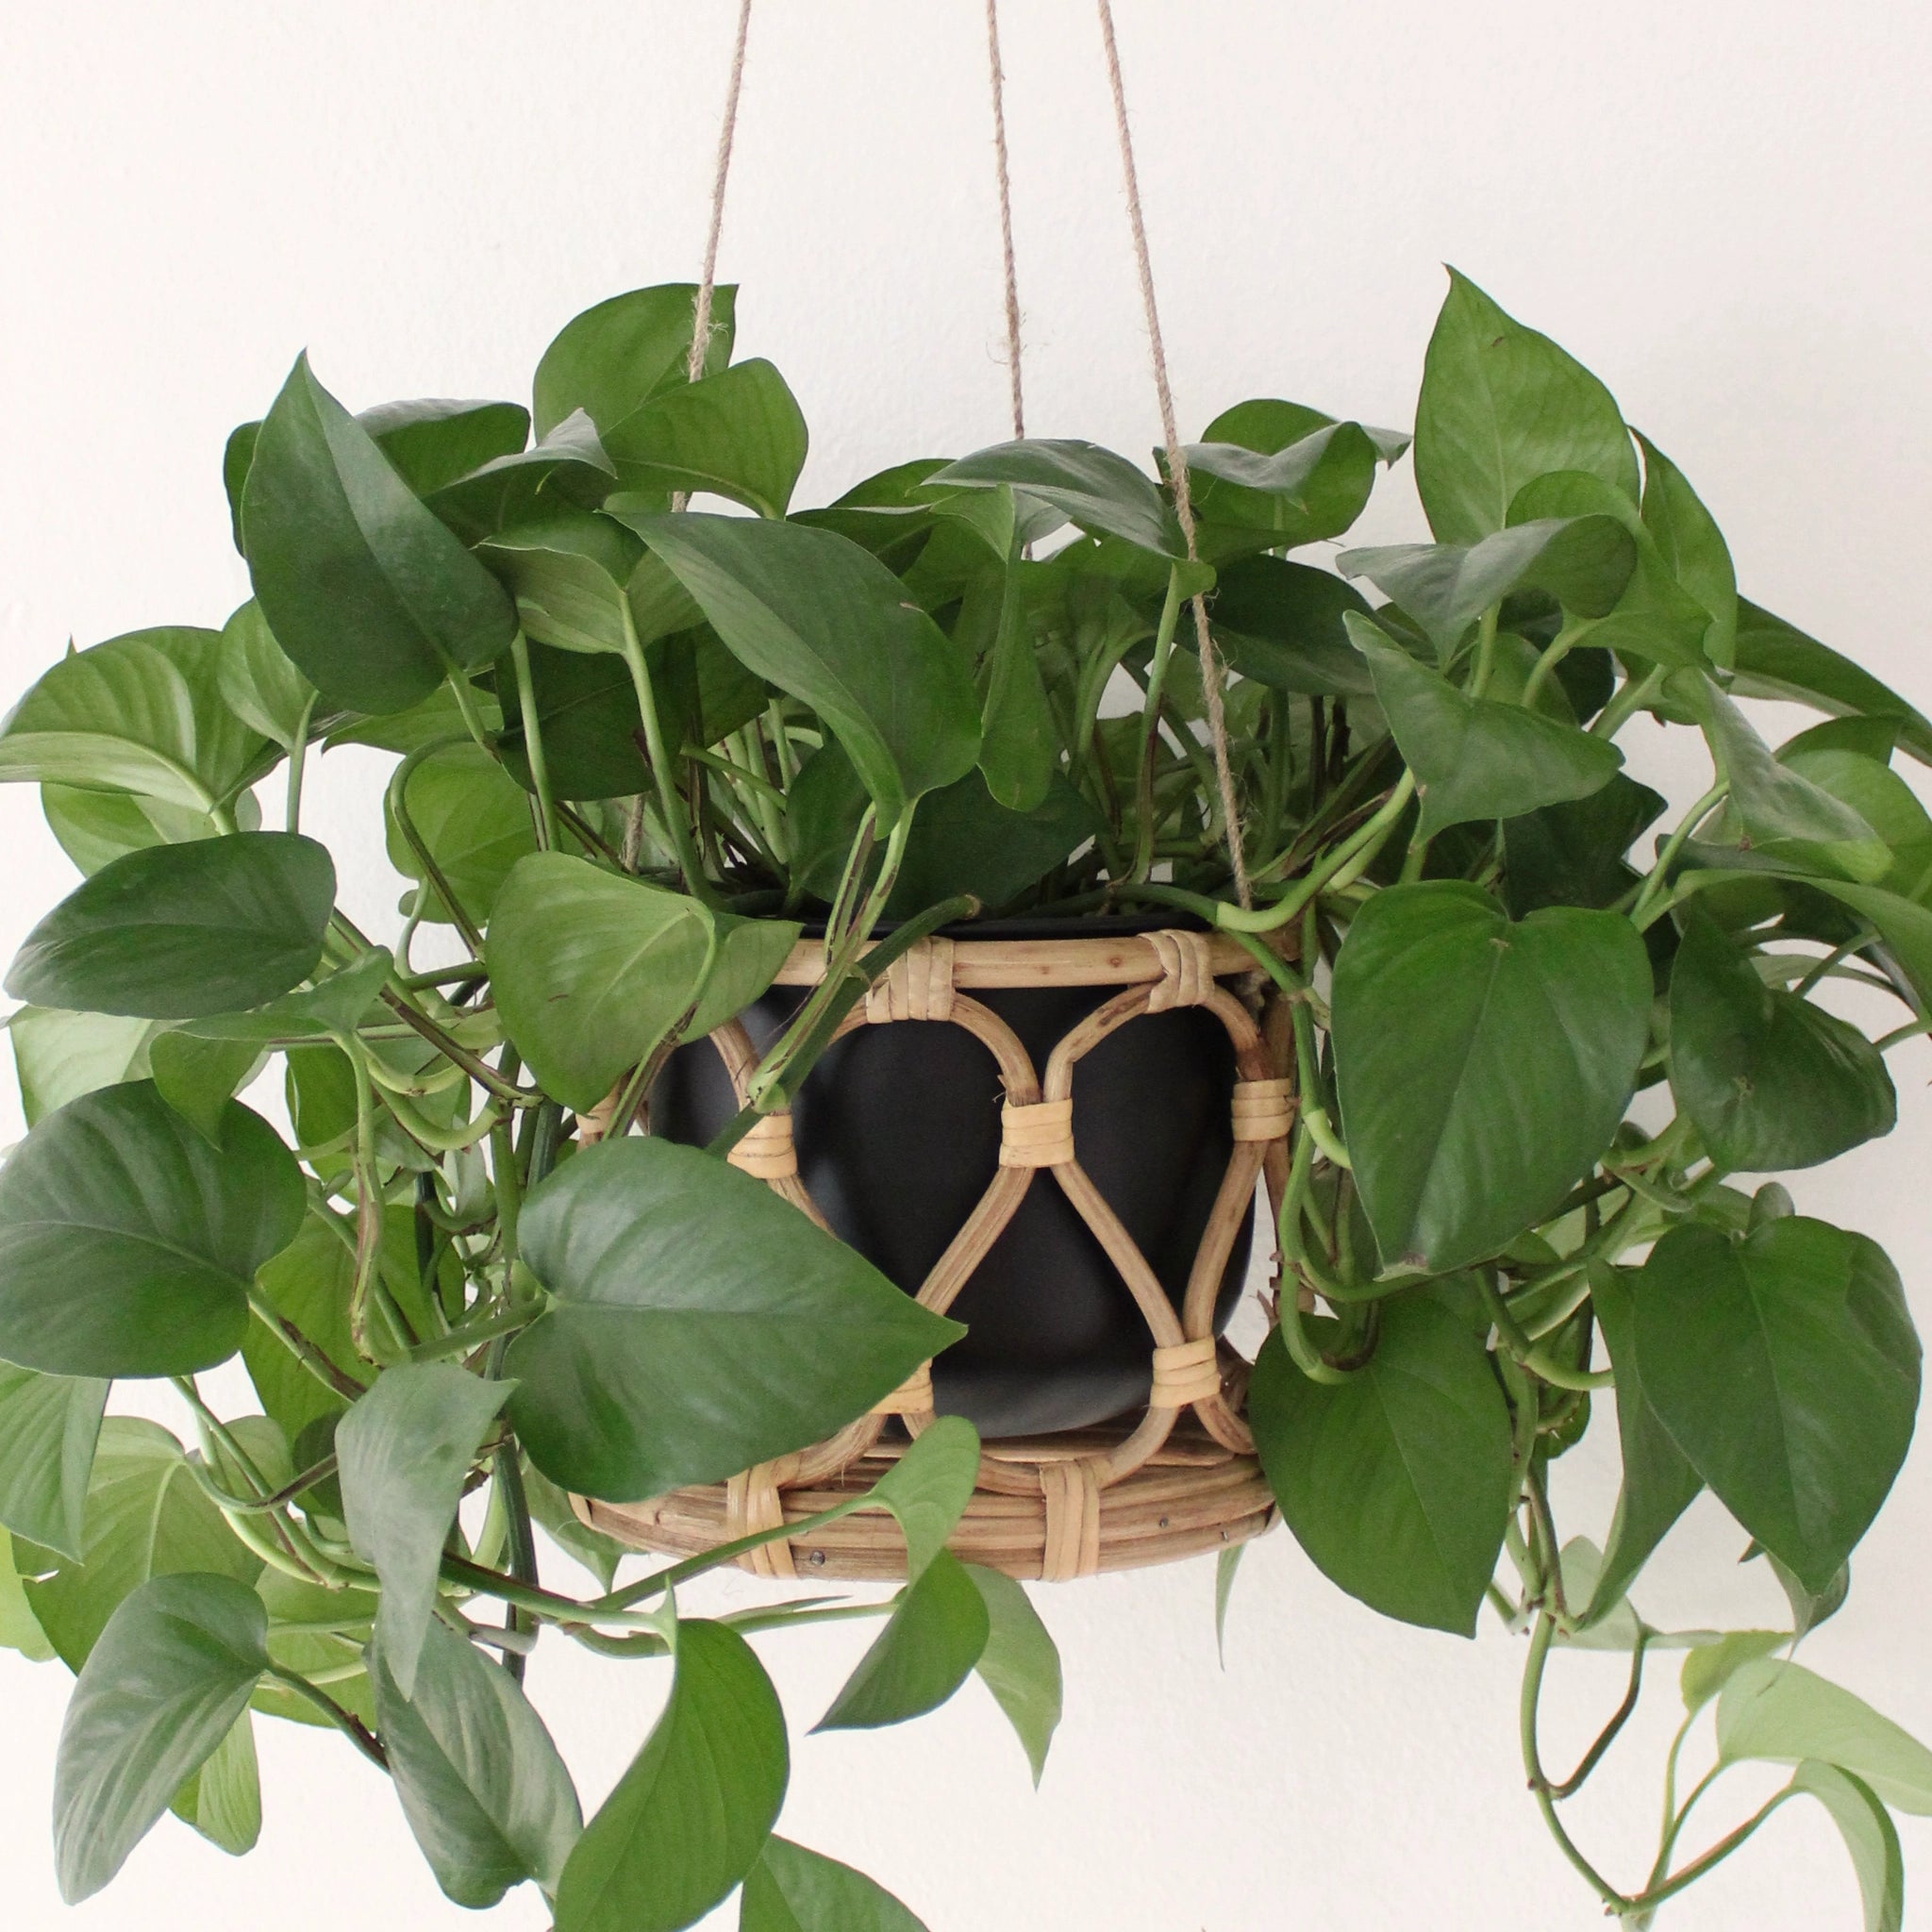 A hanging rattan planter with a black insert pot hanging in front of a white background. The rattan is bent into a rounded lattice pattern. The planter has a green trailing Pothos plant hanging inside of it.